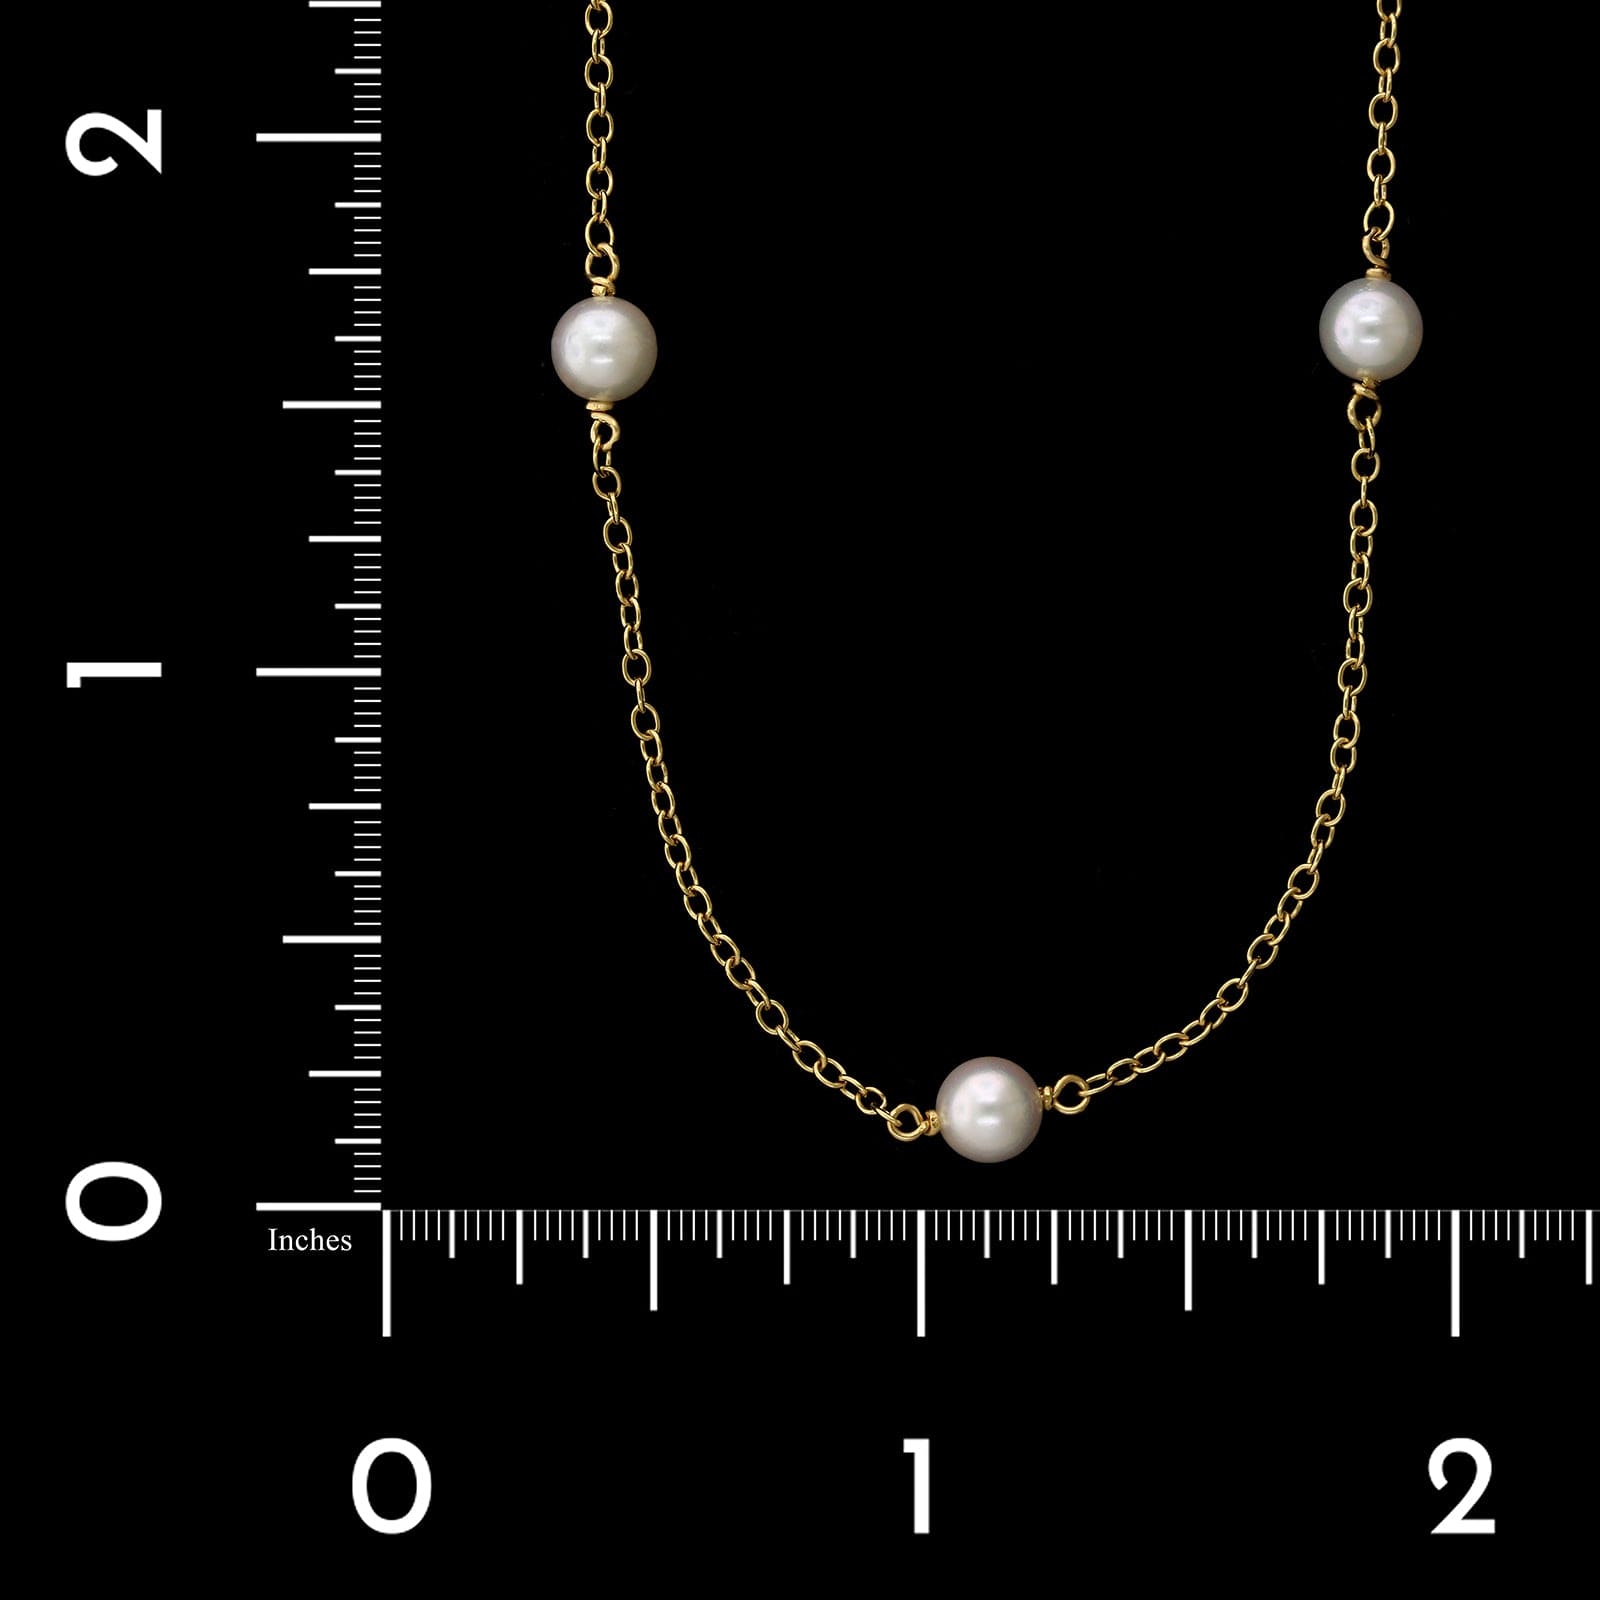 Tiffany & Co. 18K Yellow Gold Estate Elsa Peretti Cultured 'Pearls by the Yard' Necklace